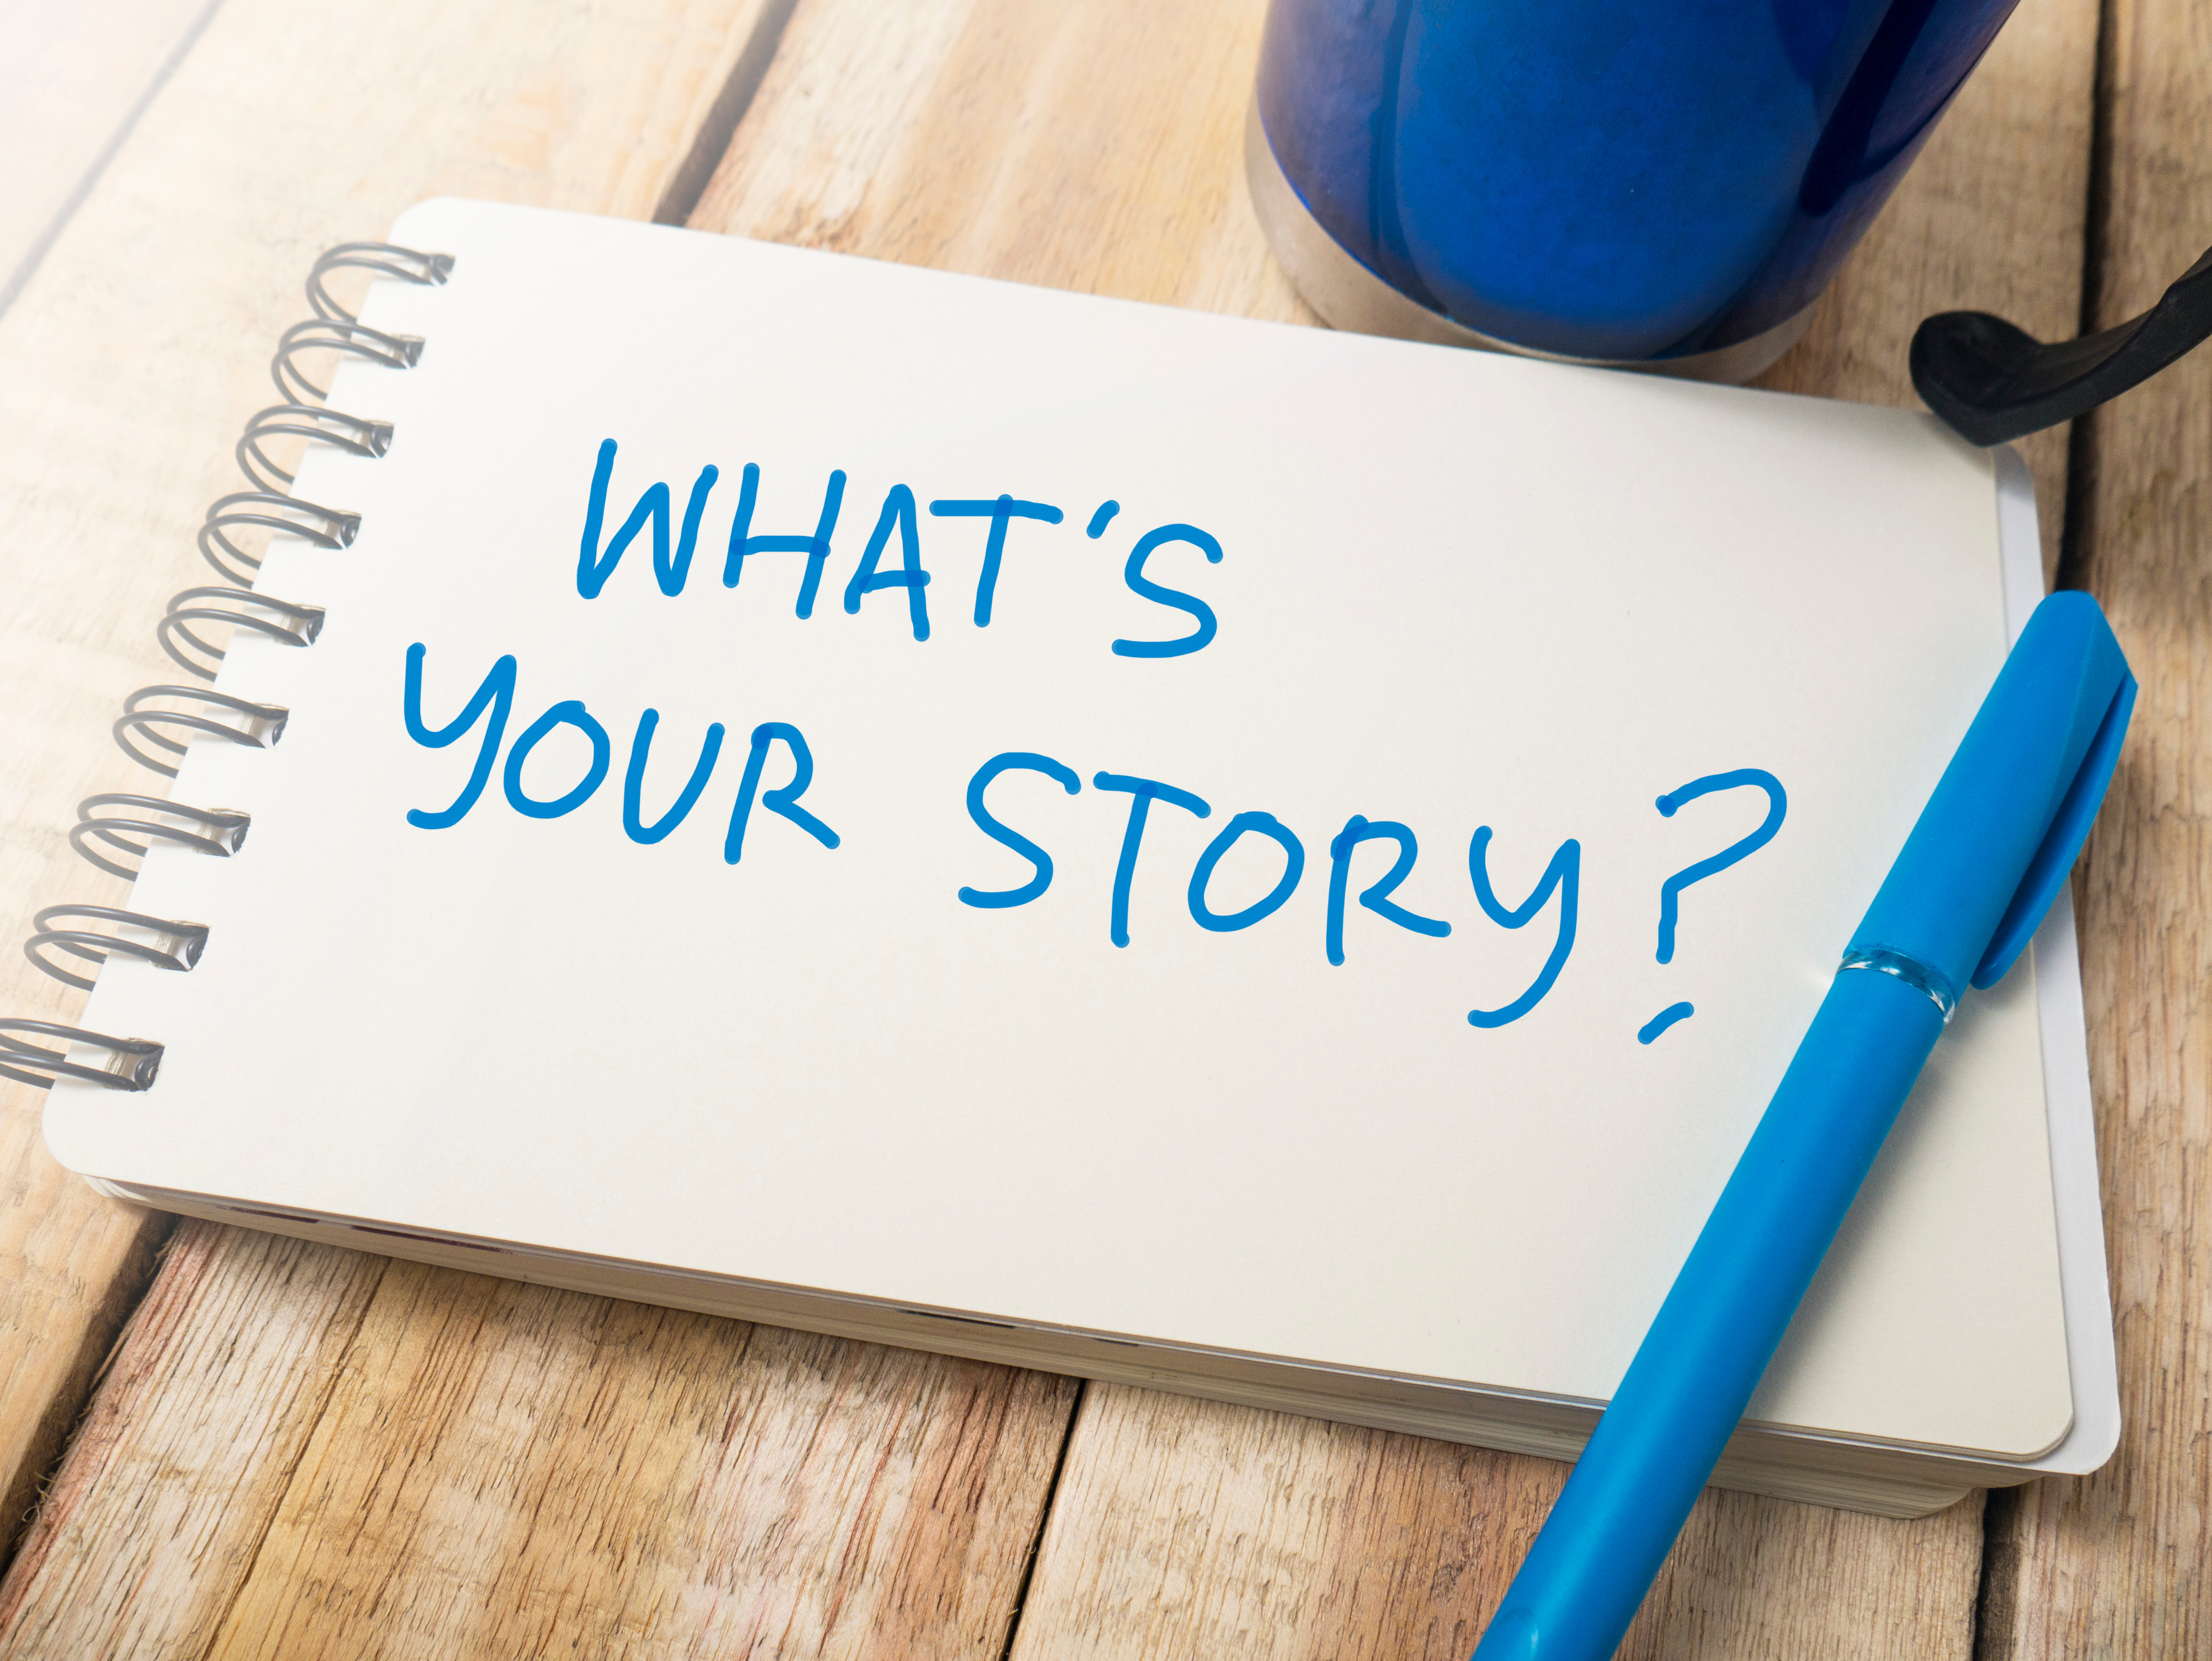 What's your story? is written on a plain notepad in blue ink.